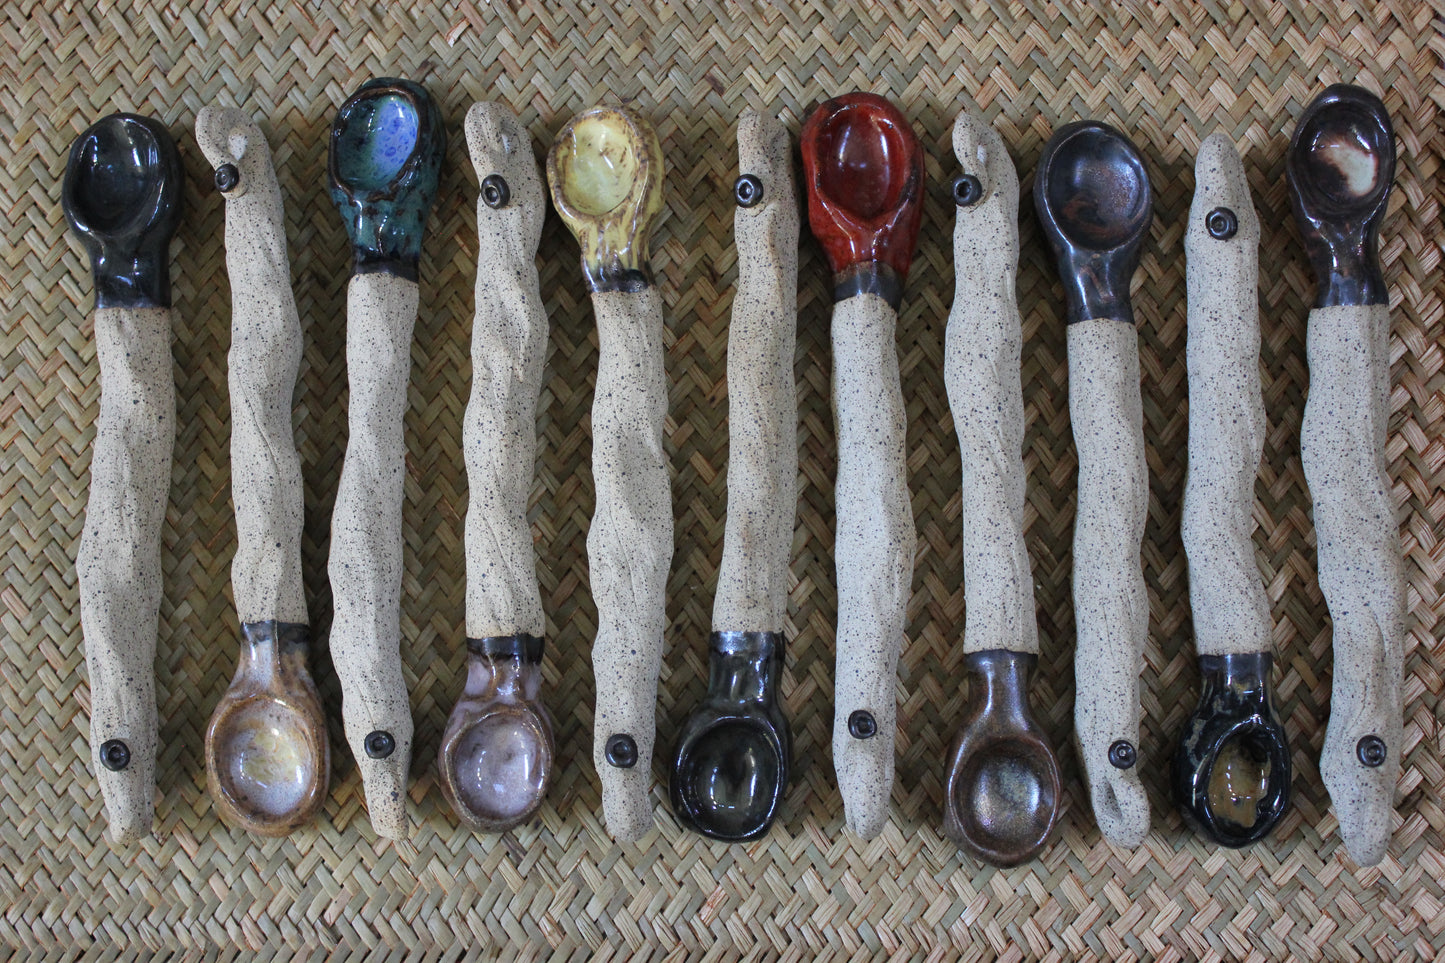 Earthy Ceramic Brown-Cream Serving Spoon as a Unique Ornament or for Food Consumption